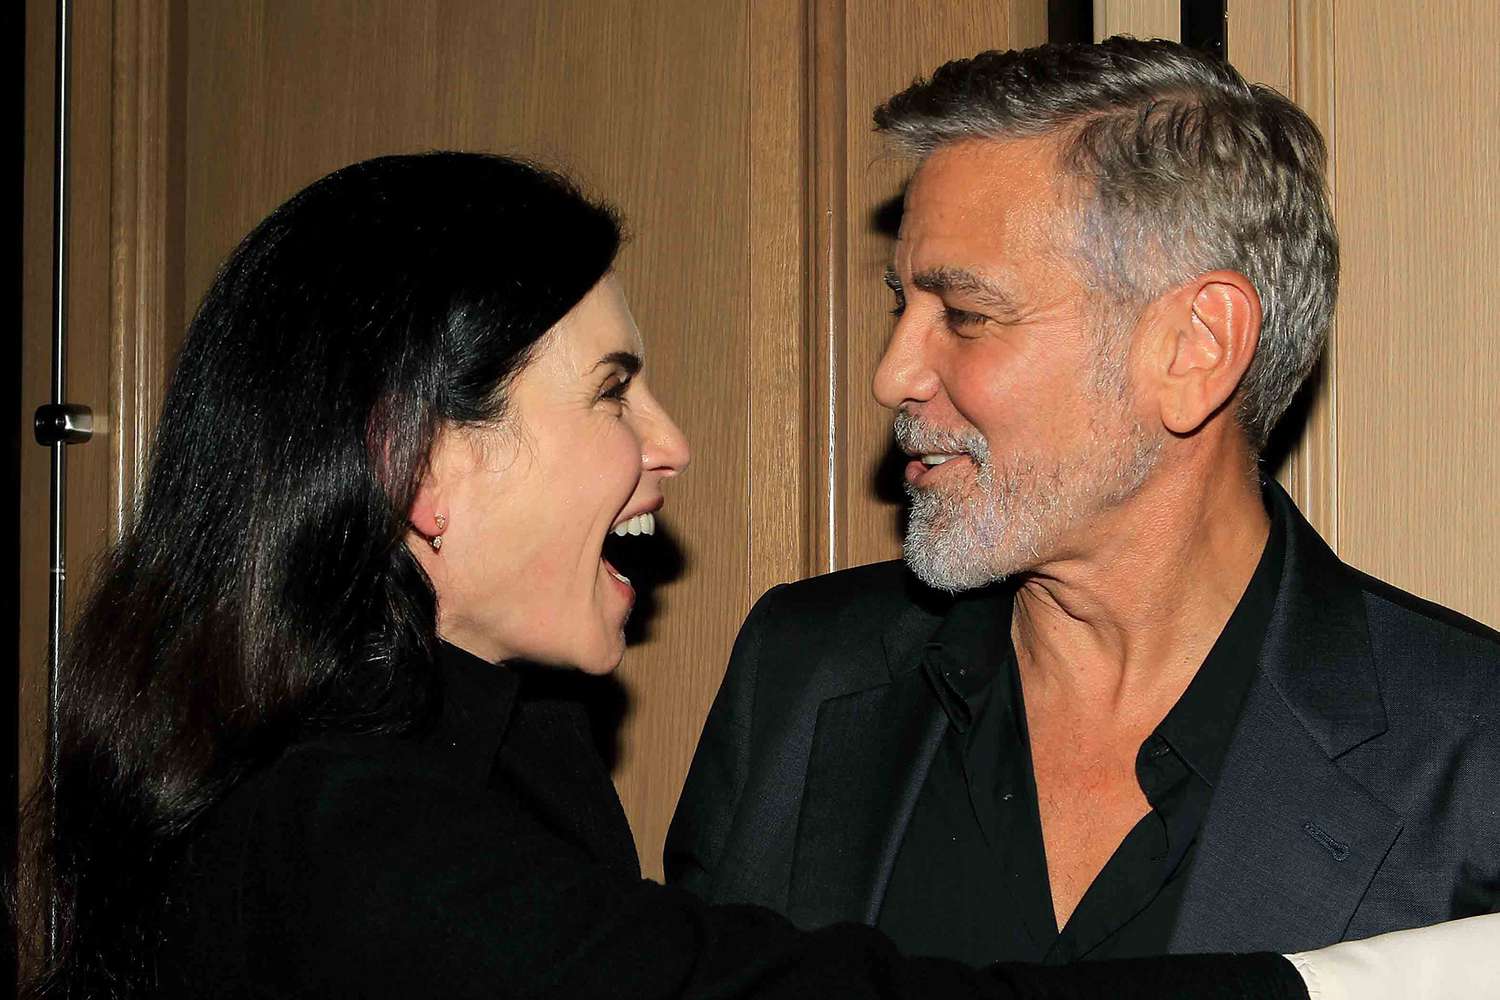 Julianna Margulies and George Clooney